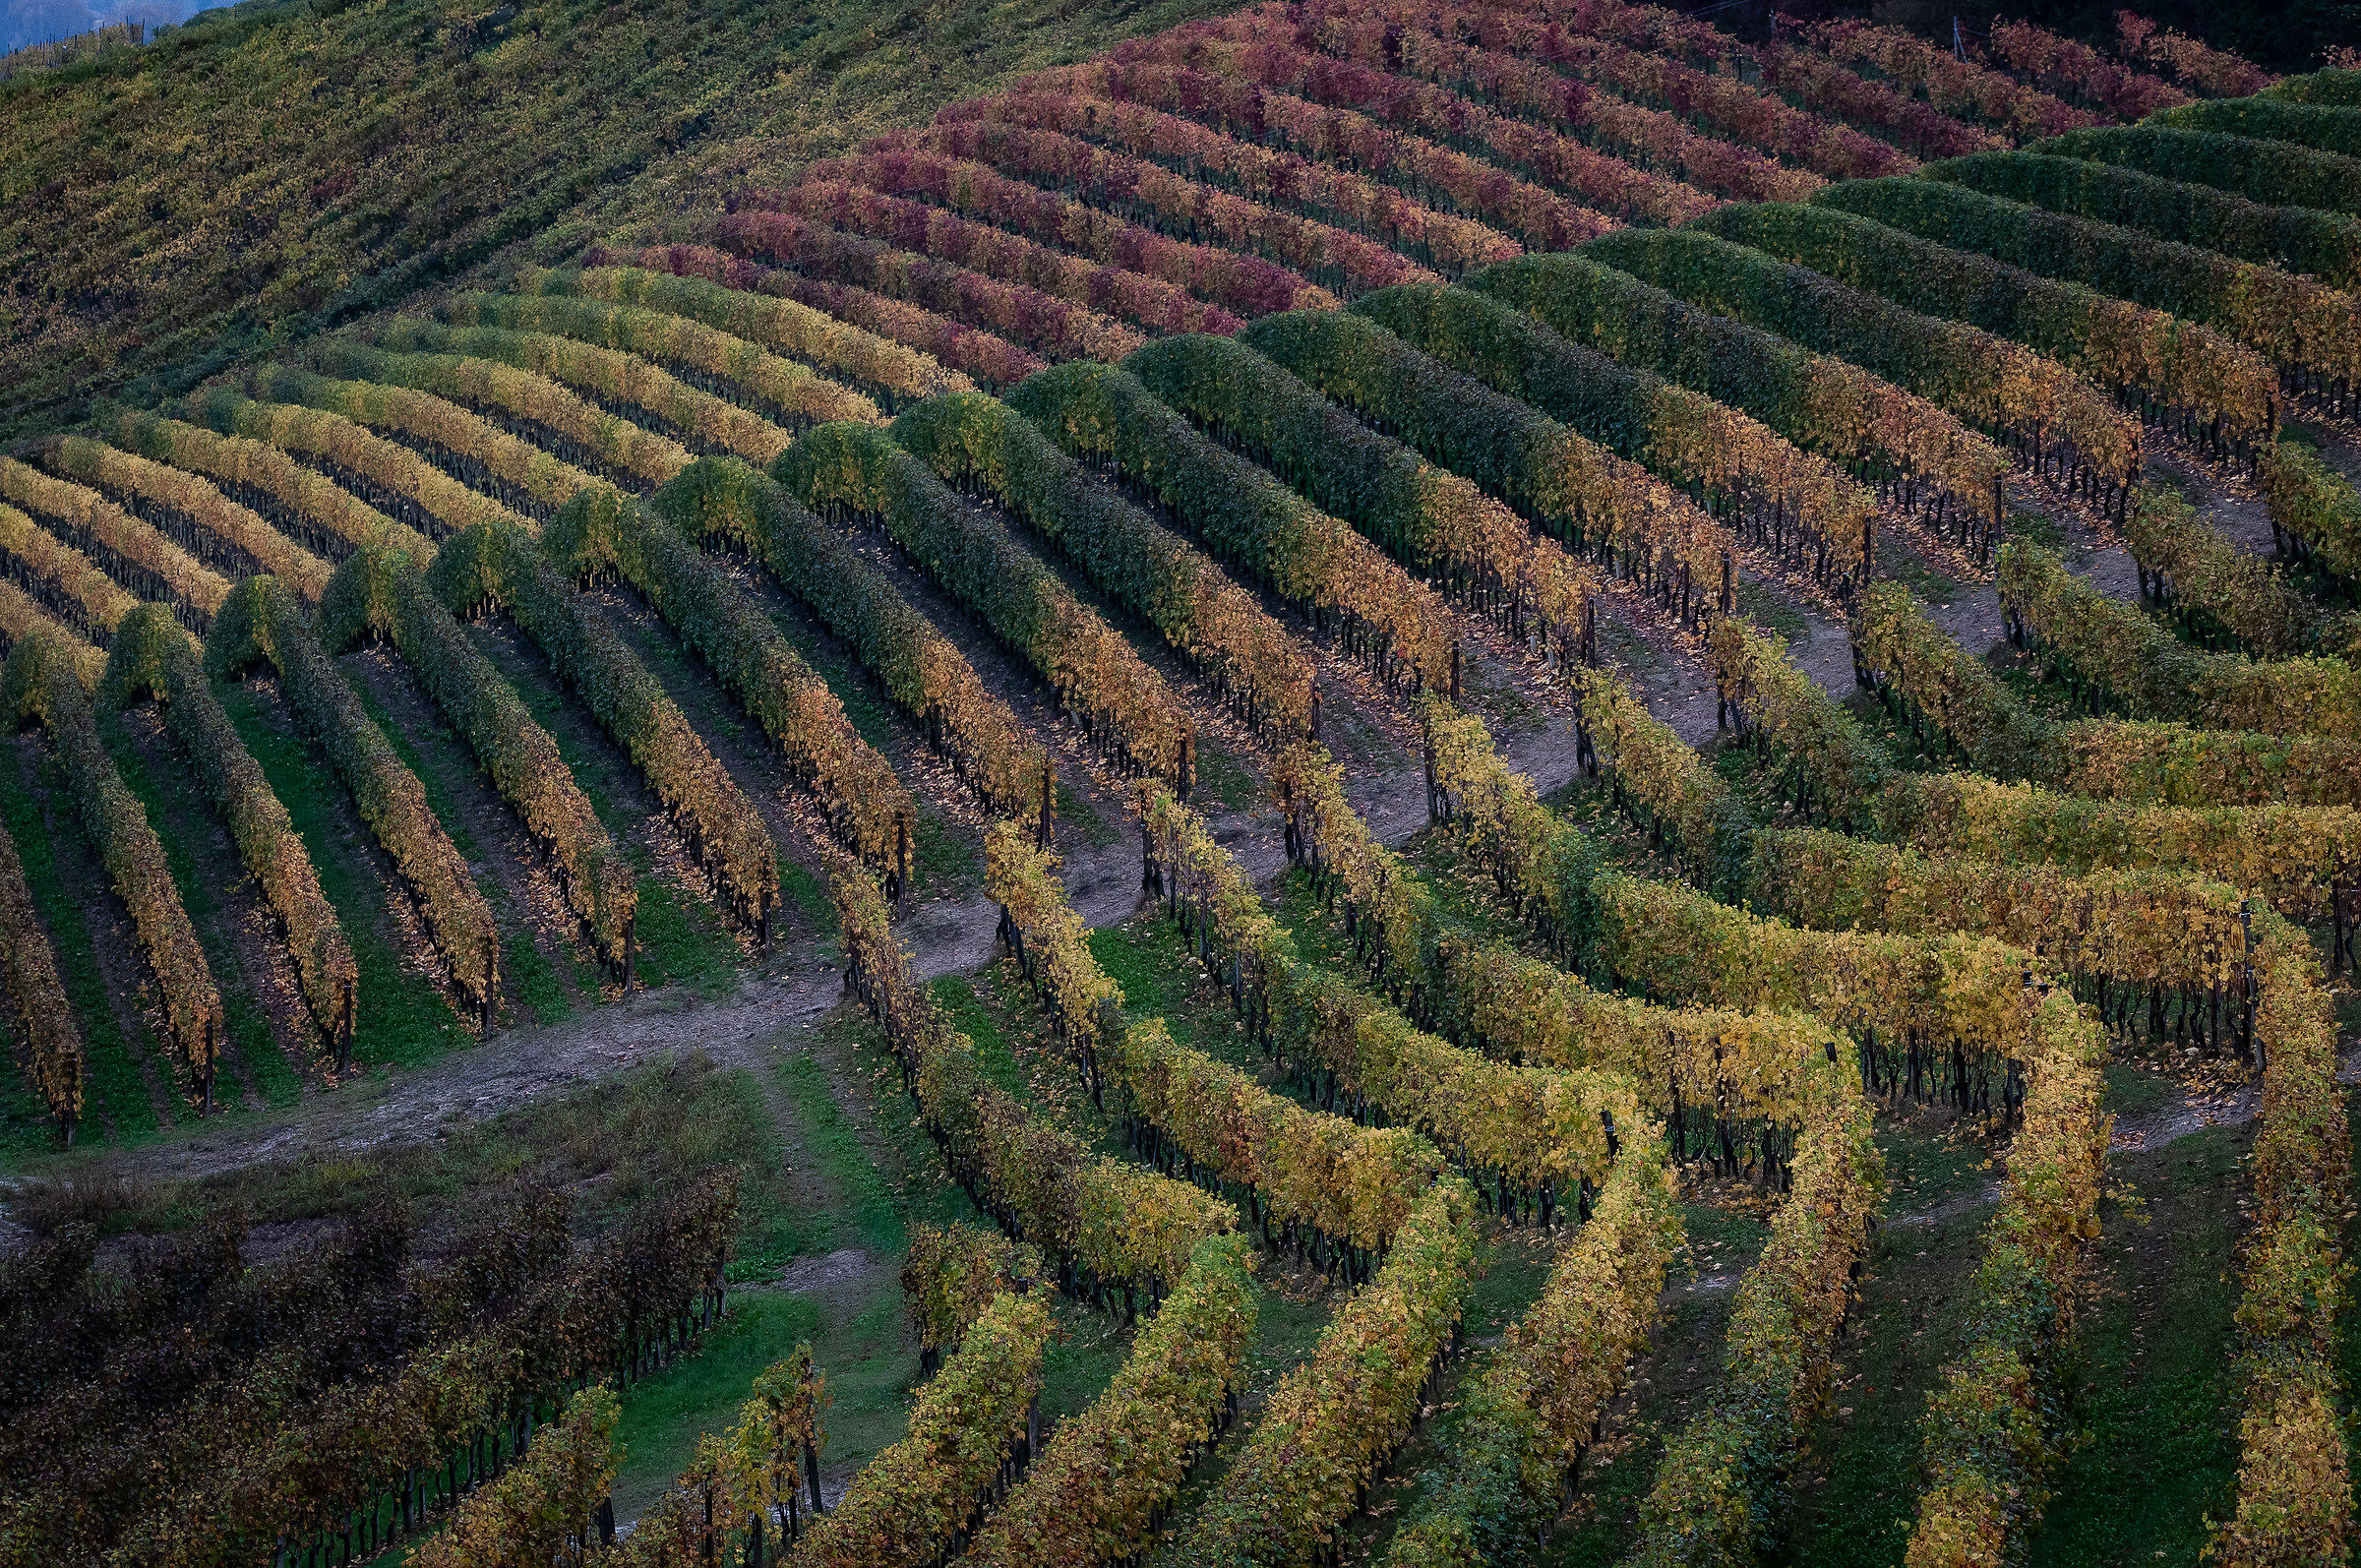 Plots-the vineyards of the Langhe...